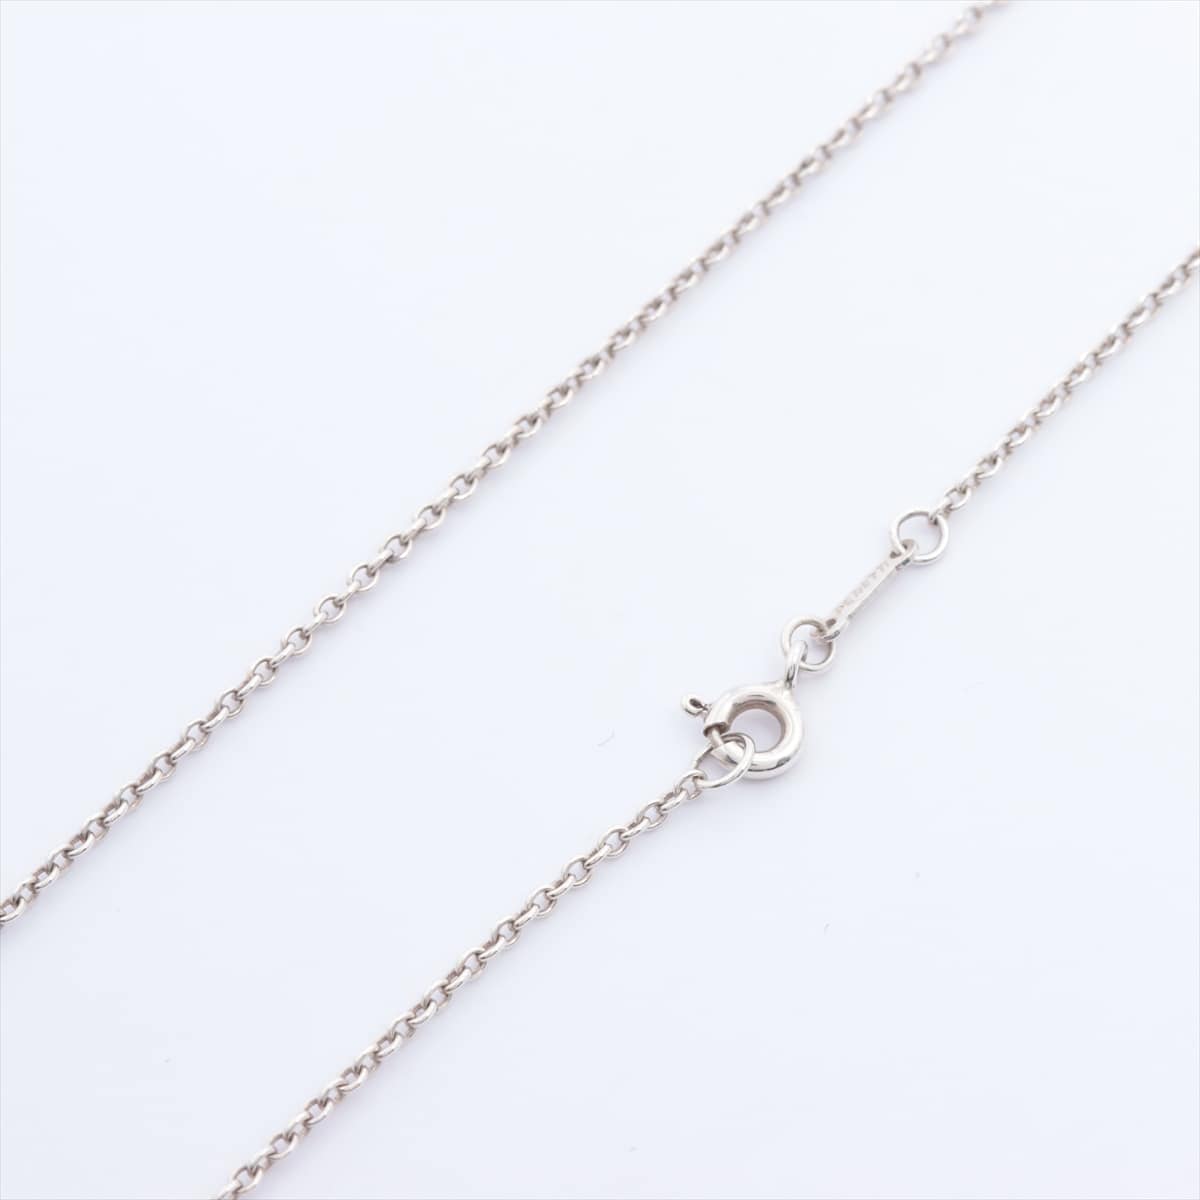 Tiffany Open Heart Necklace 925 8.8g Silver